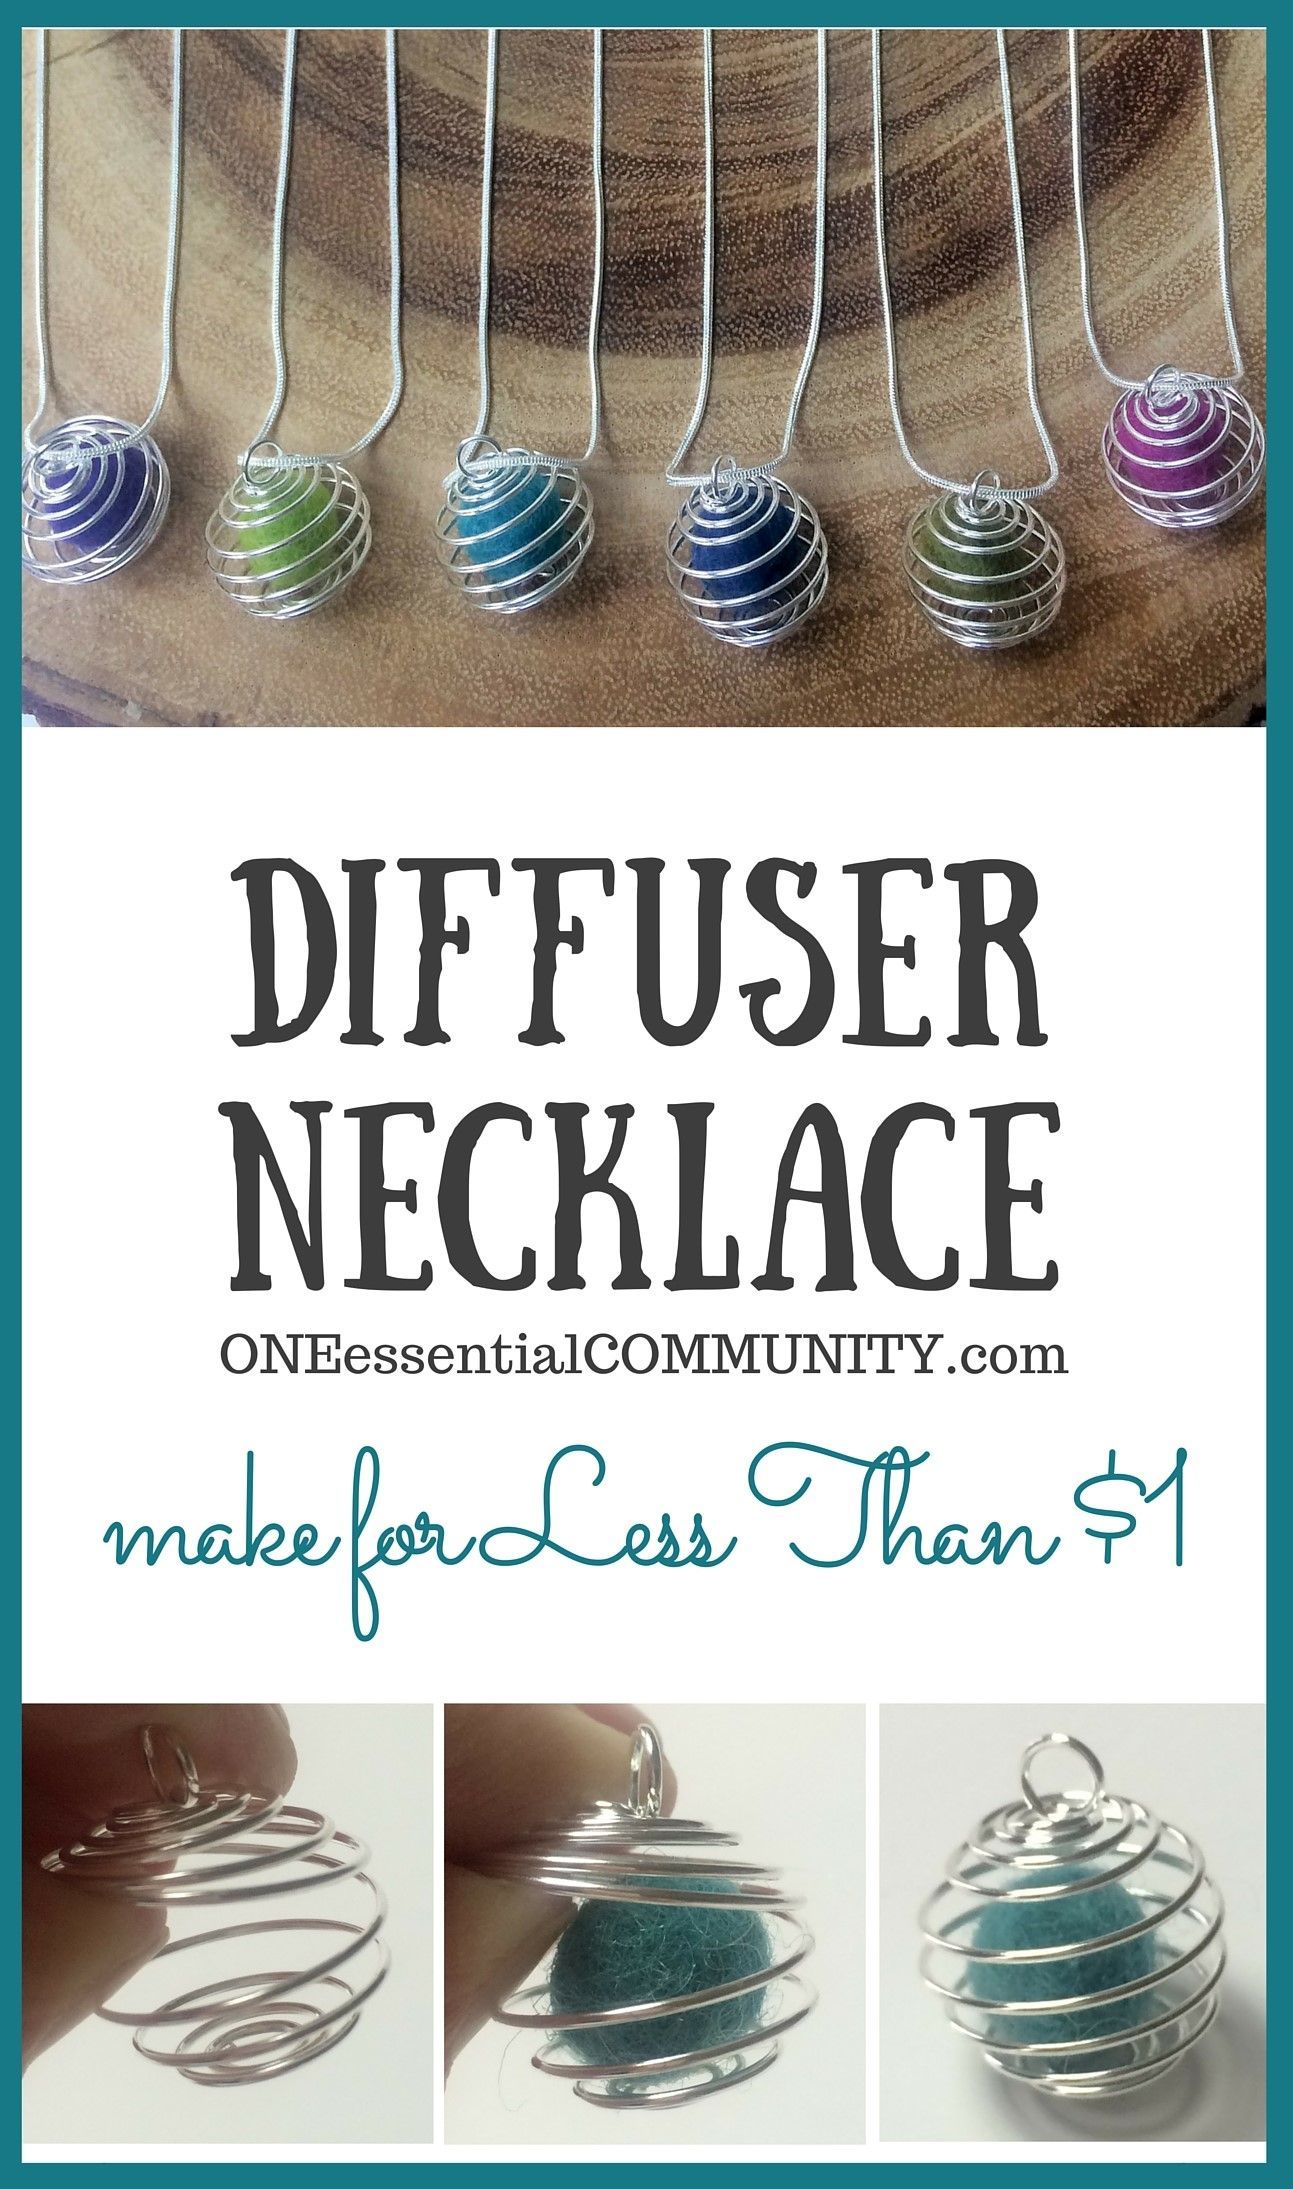 Make your own essential oil diffuser necklace for less than 1 buck each and in less than 1 minute!!